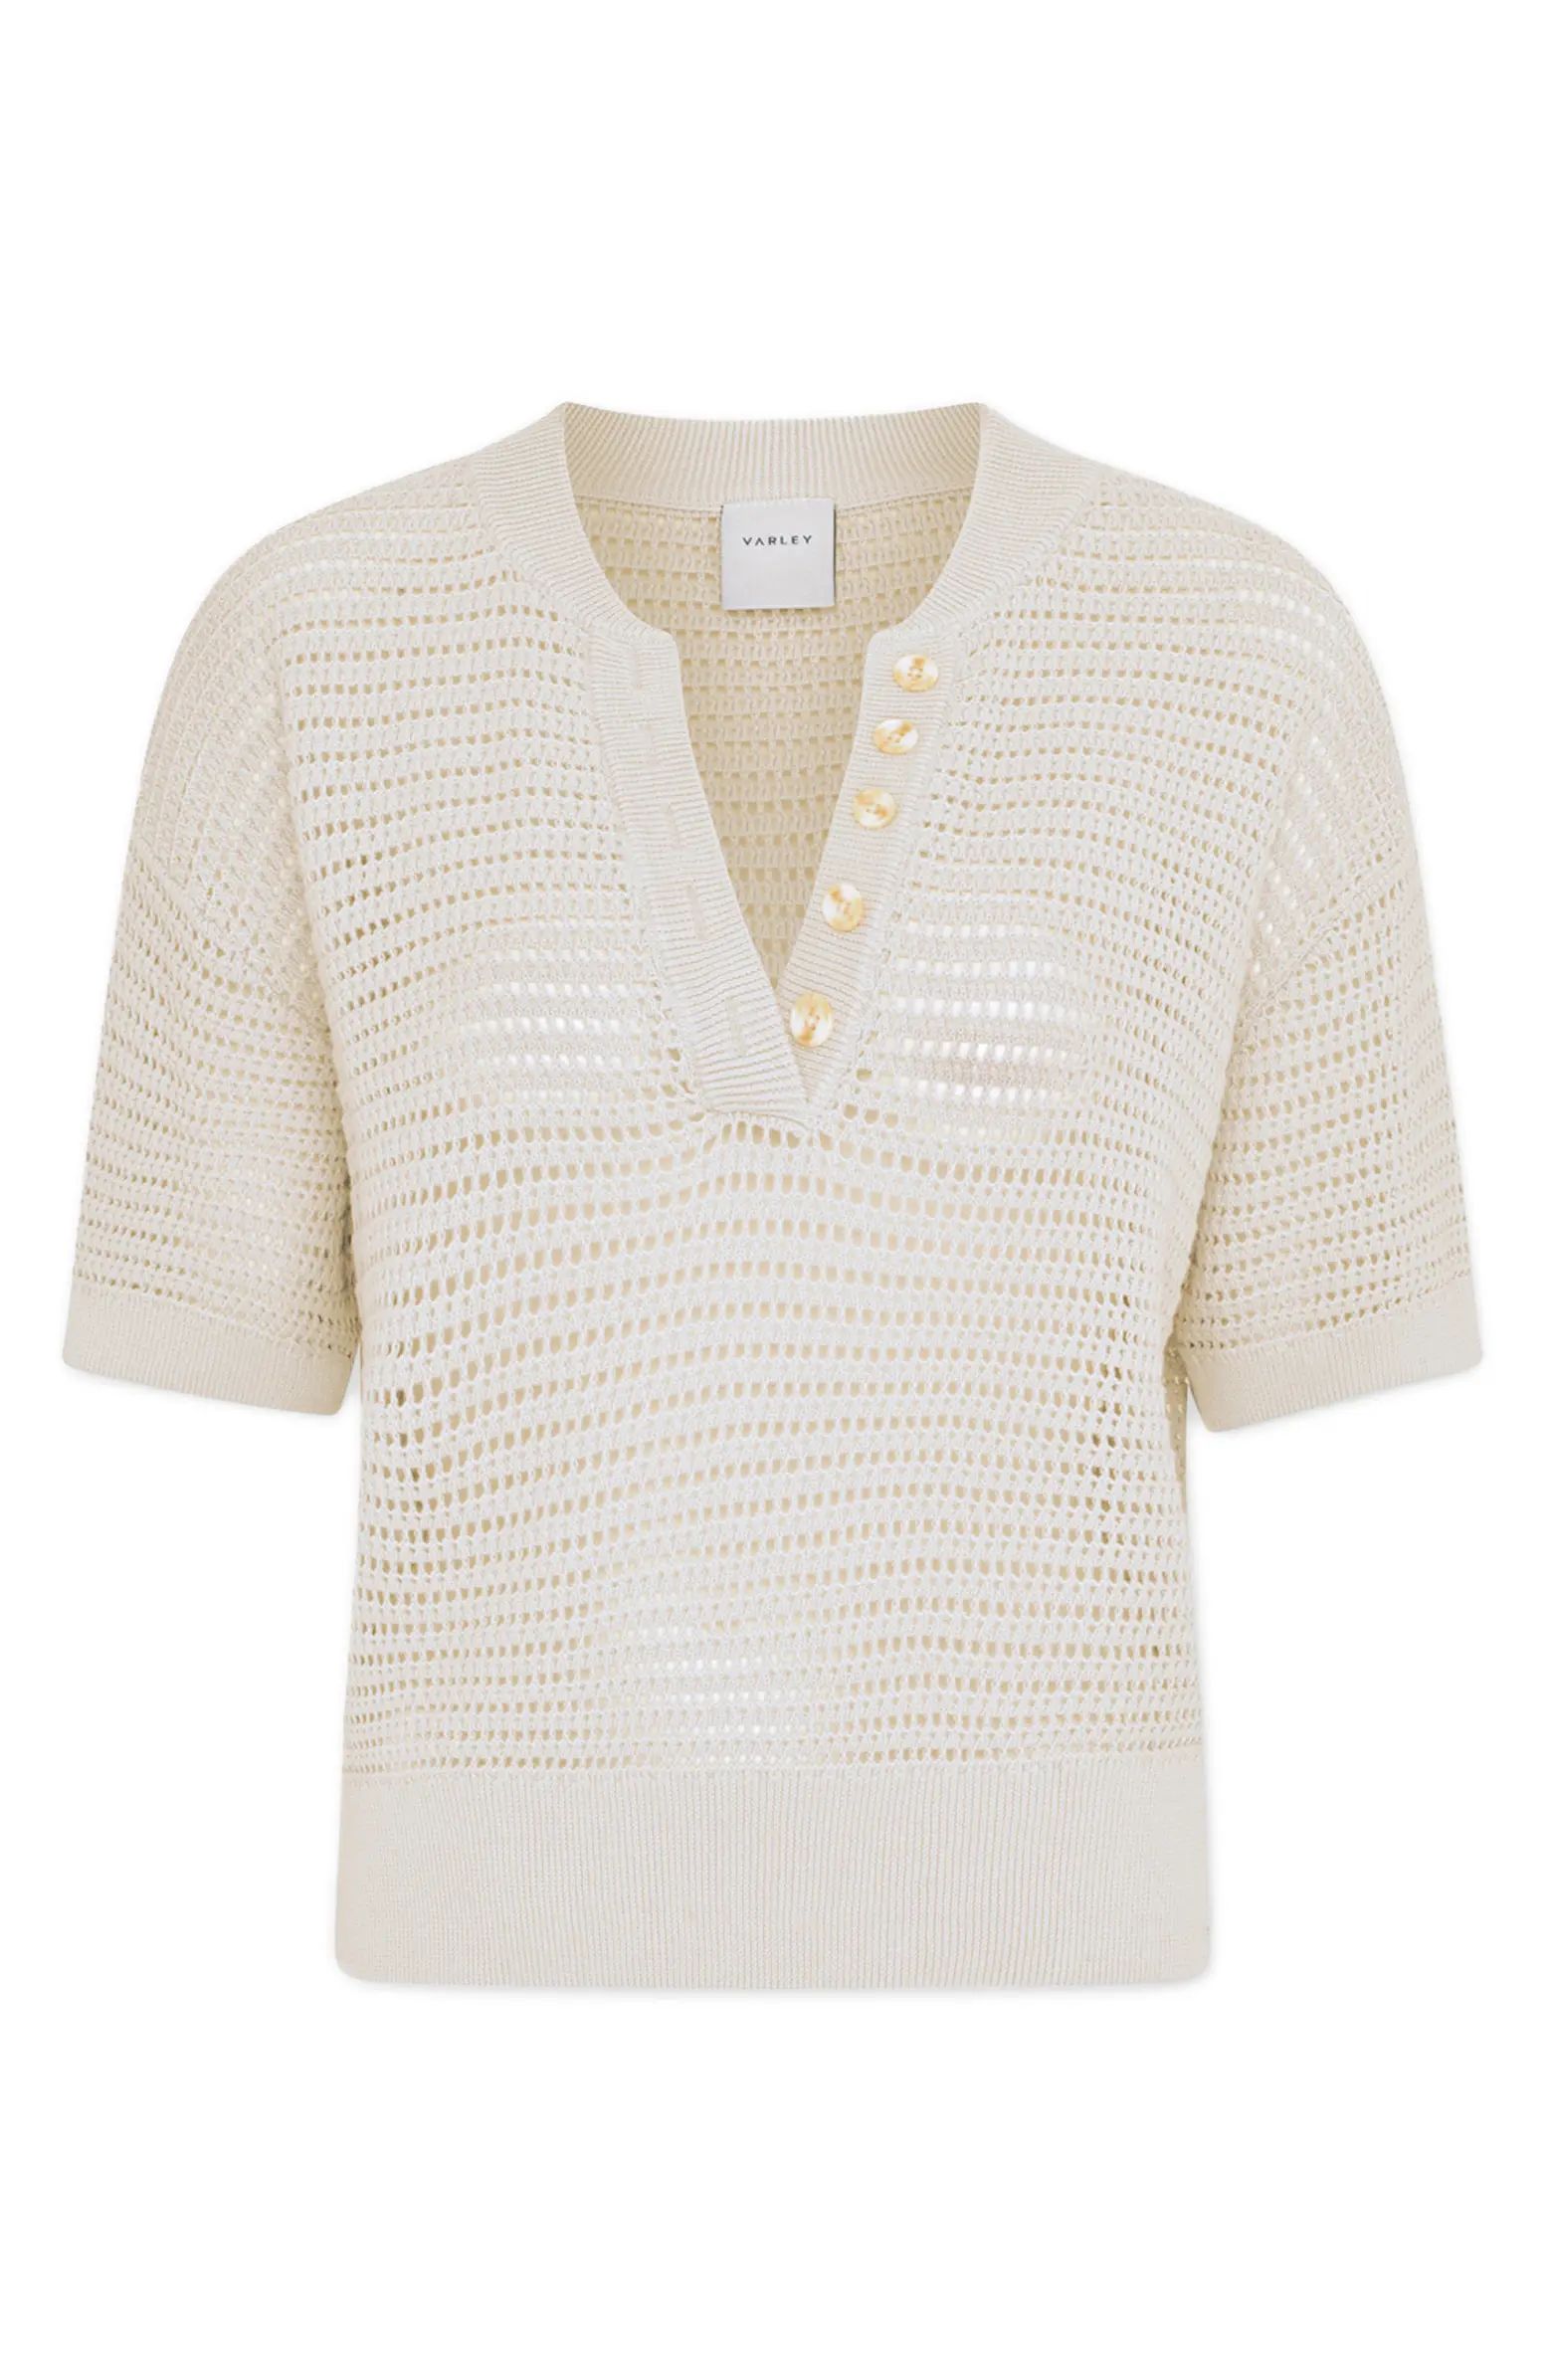 Callie Sheer Knit Cotton Top | Nordstrom